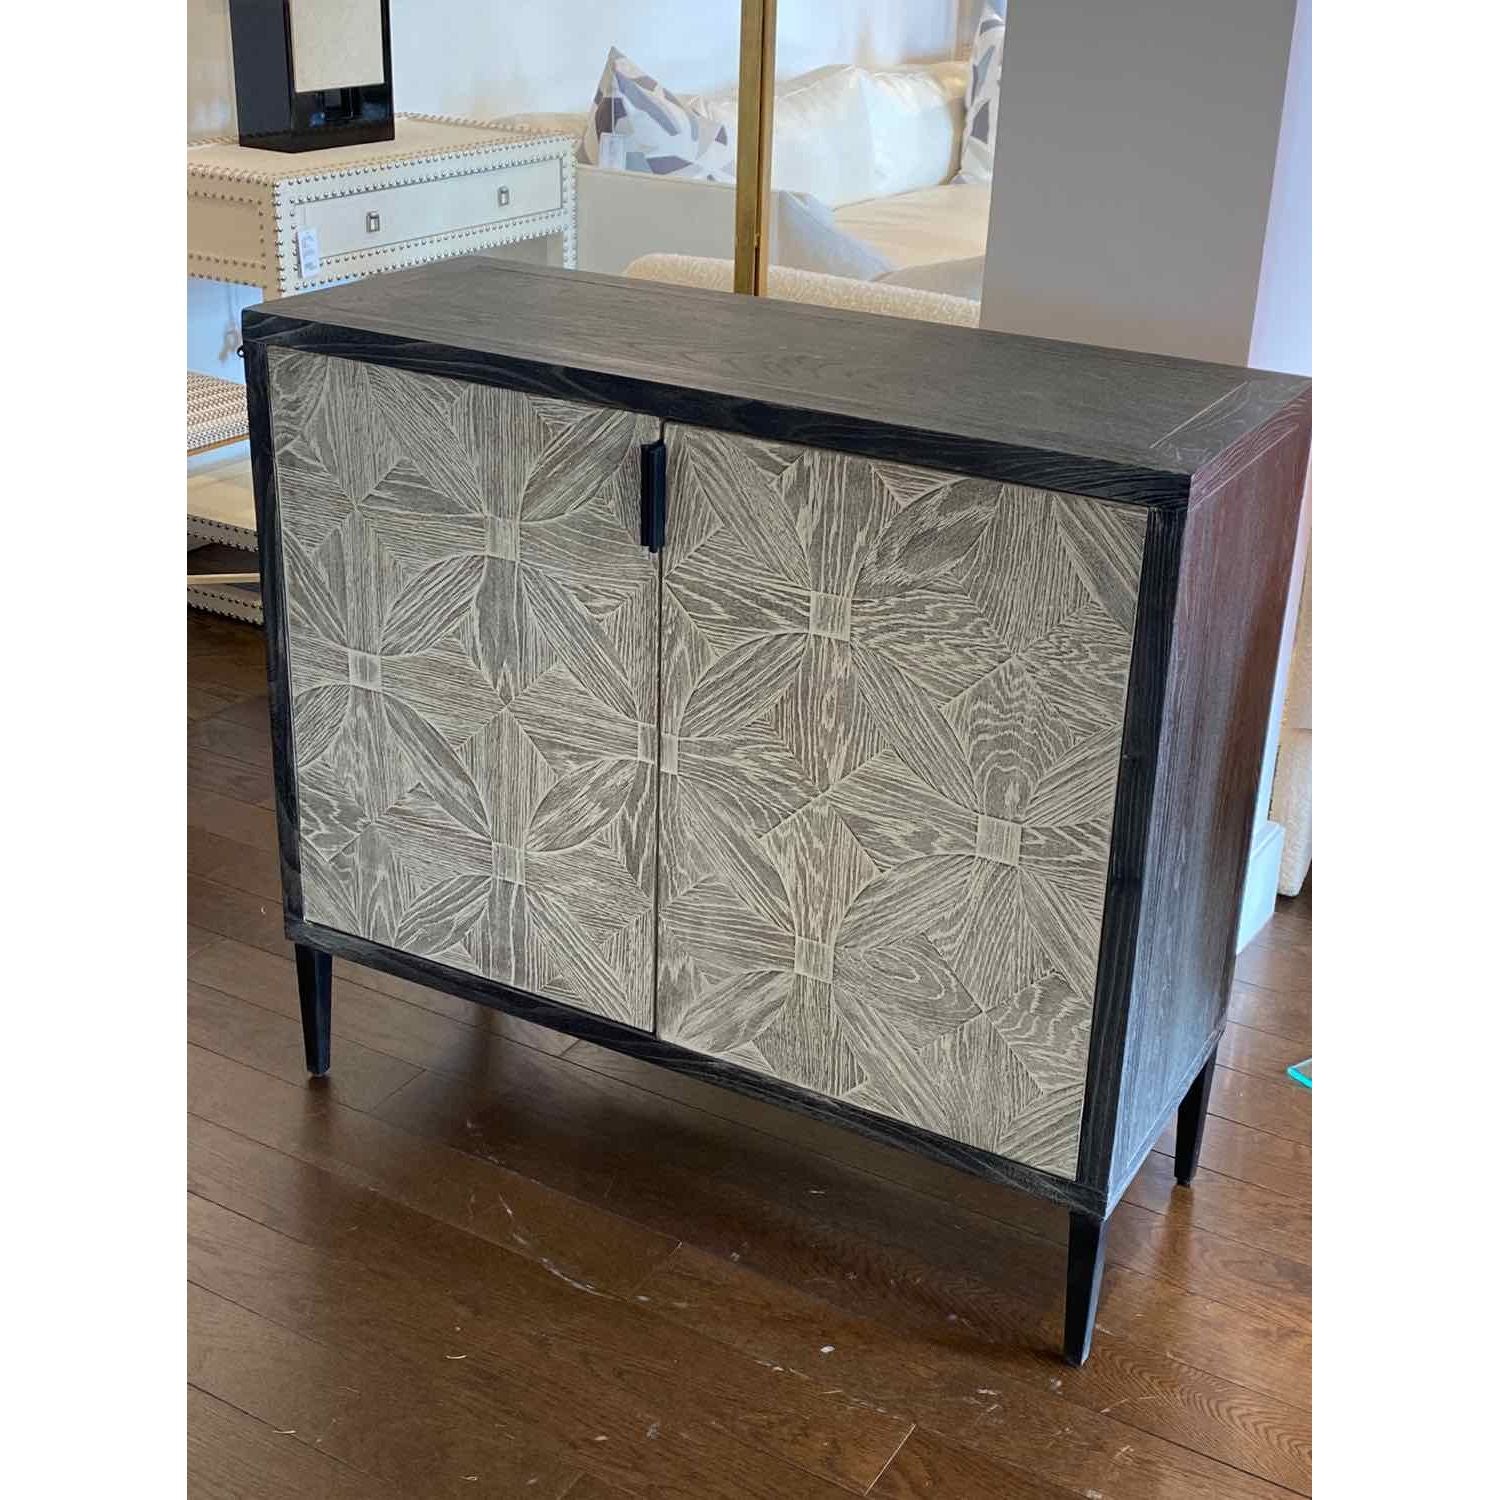 'Laurentia' 2-Door Accent Cabinet in Grey / Black by Jim Parsons for Uttermost - colletteconsignment.com